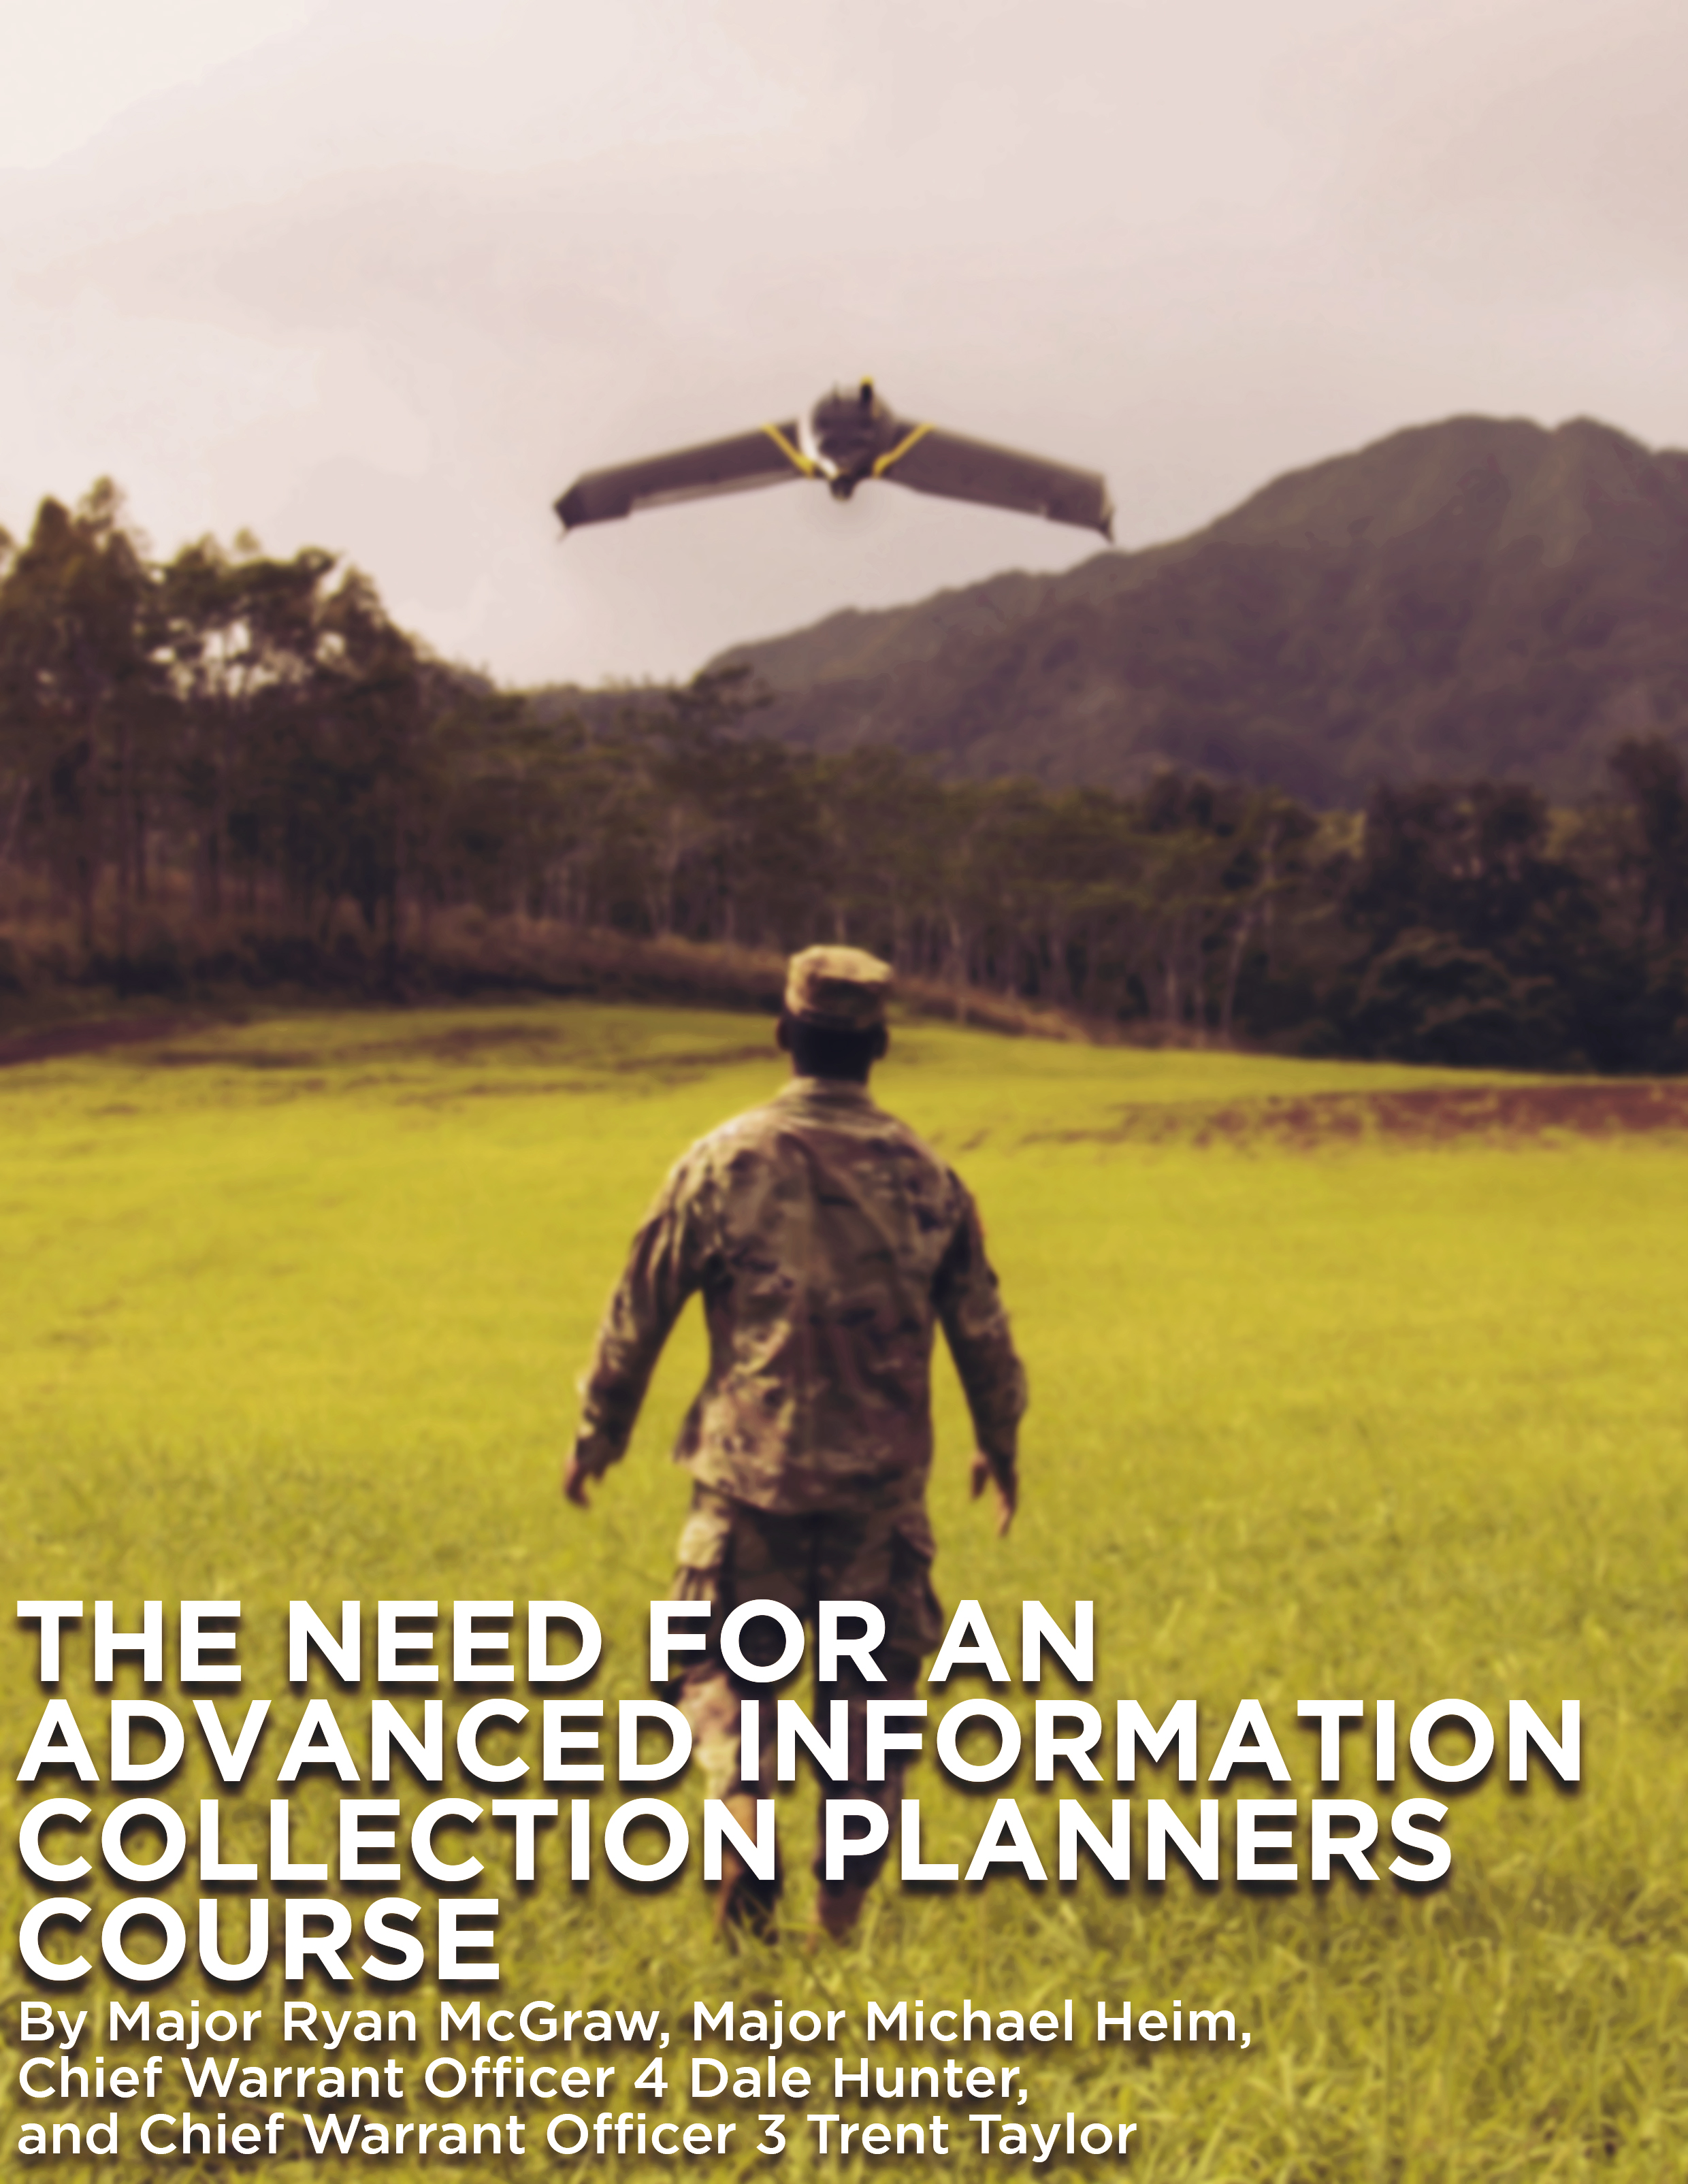 The Need for an Advanced Information Collection Planners Course — 16 May 2022